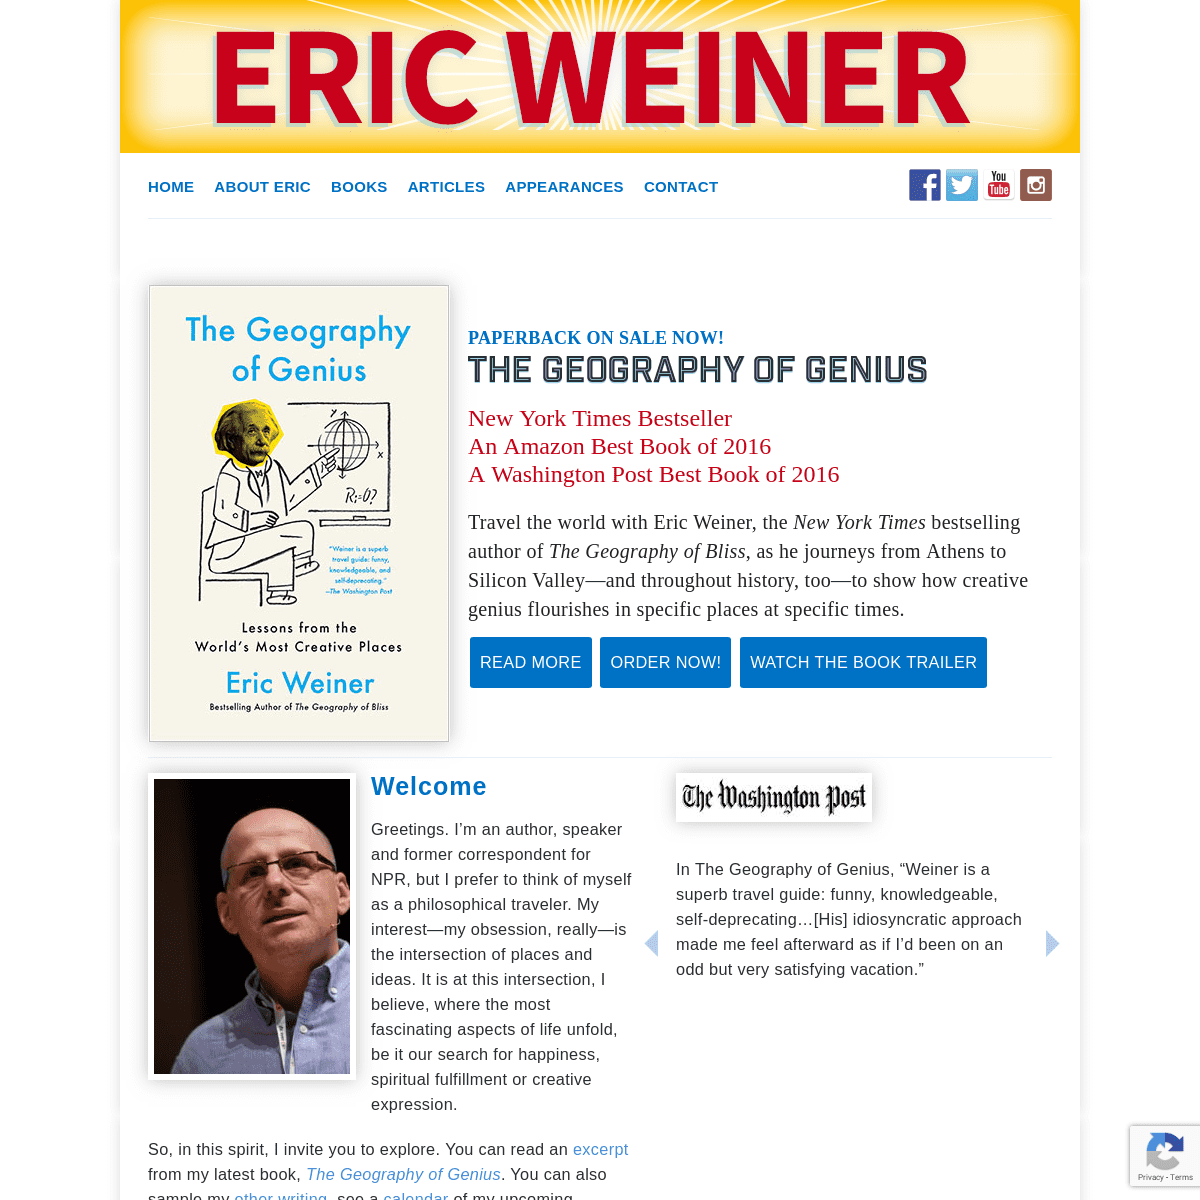 A complete backup of ericweinerbooks.com